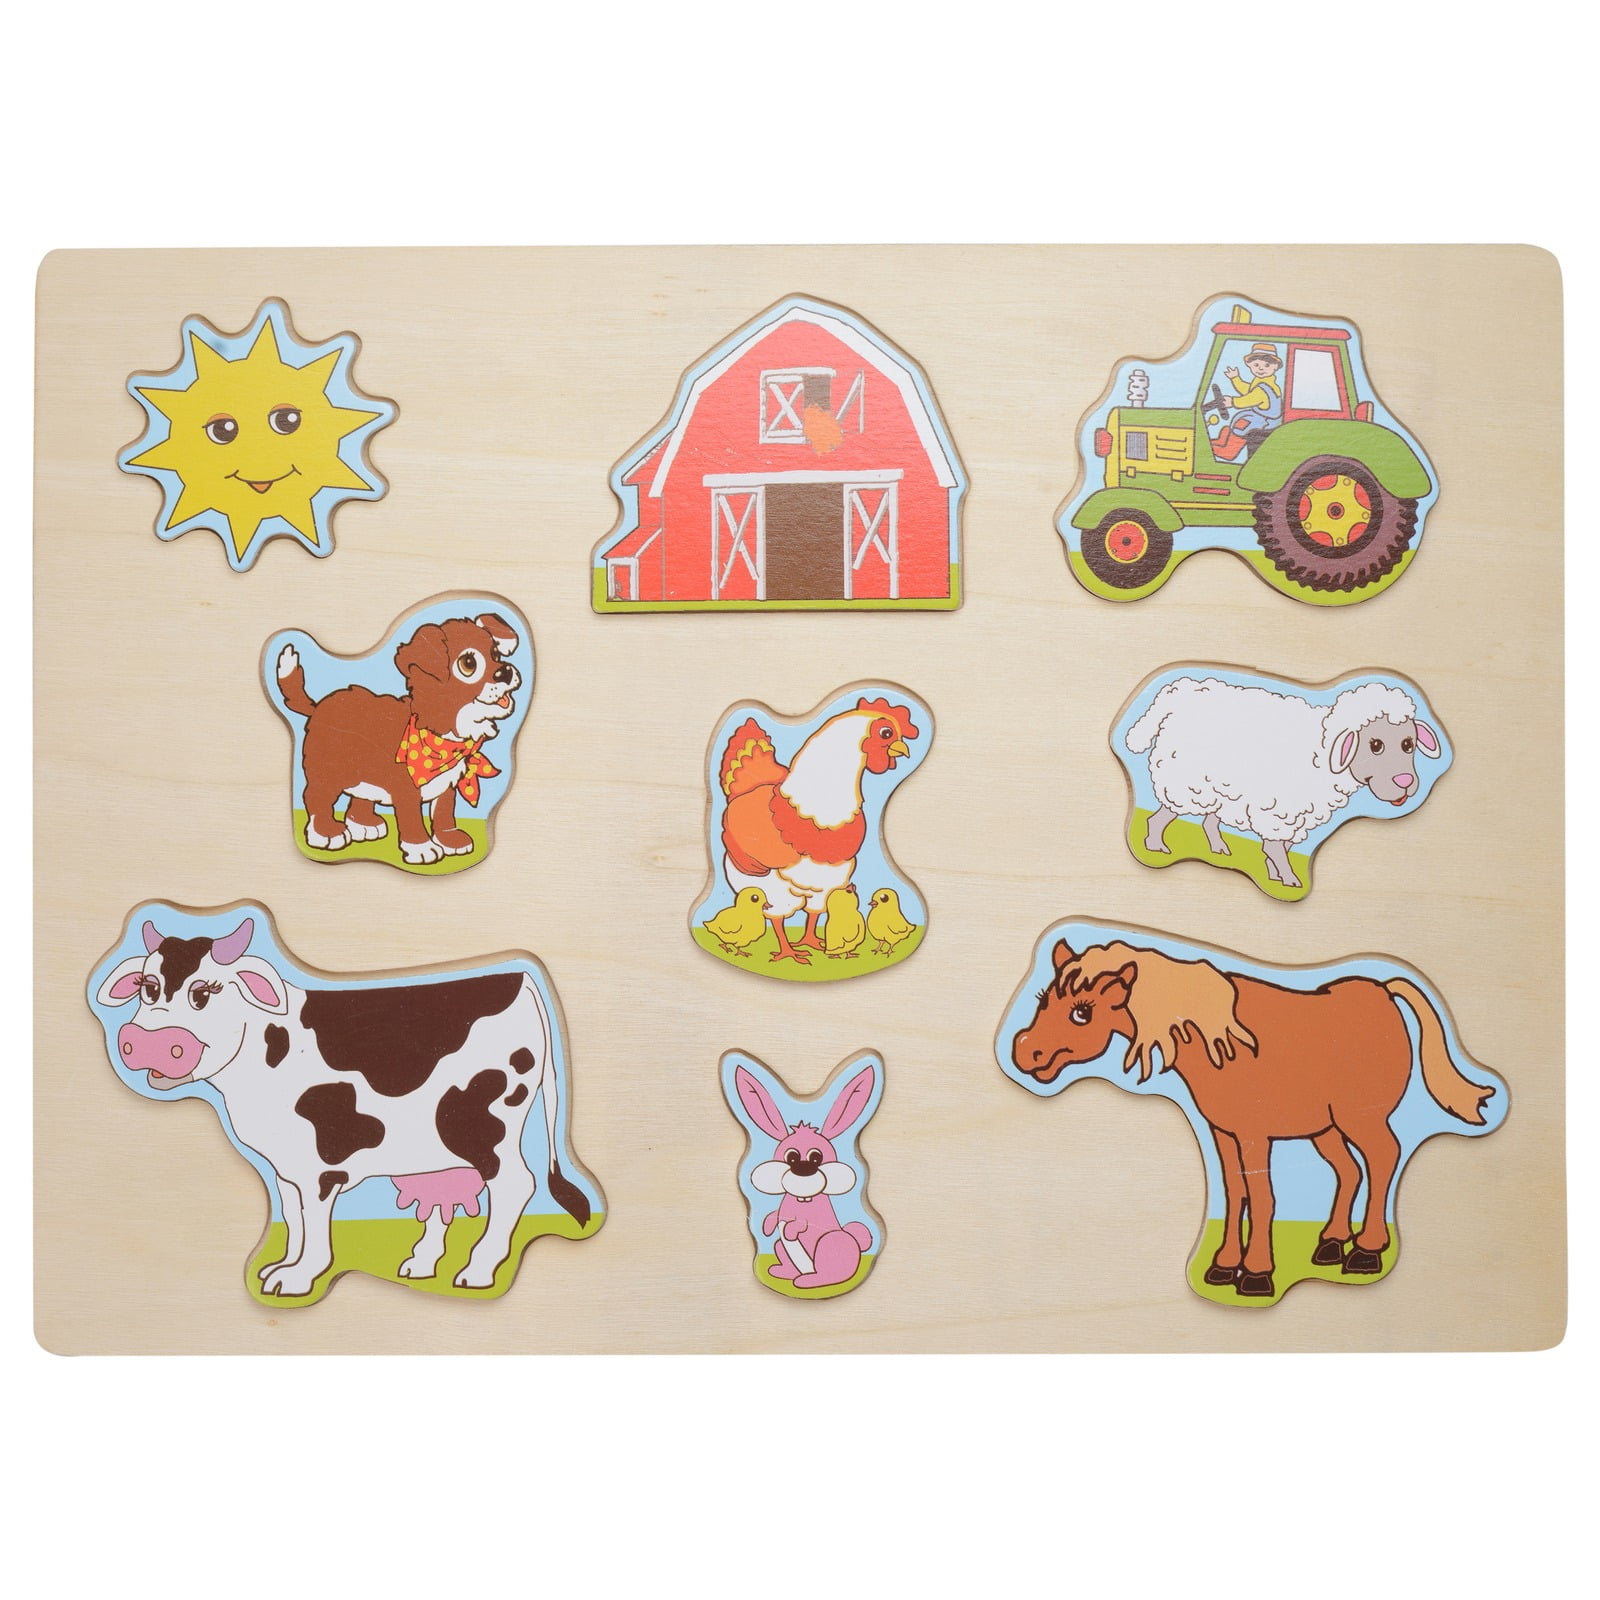 Eliiti Wooden Farm Animals Puzzle for Toddlers 2 to 4 Years Old Boys Girls Toy 